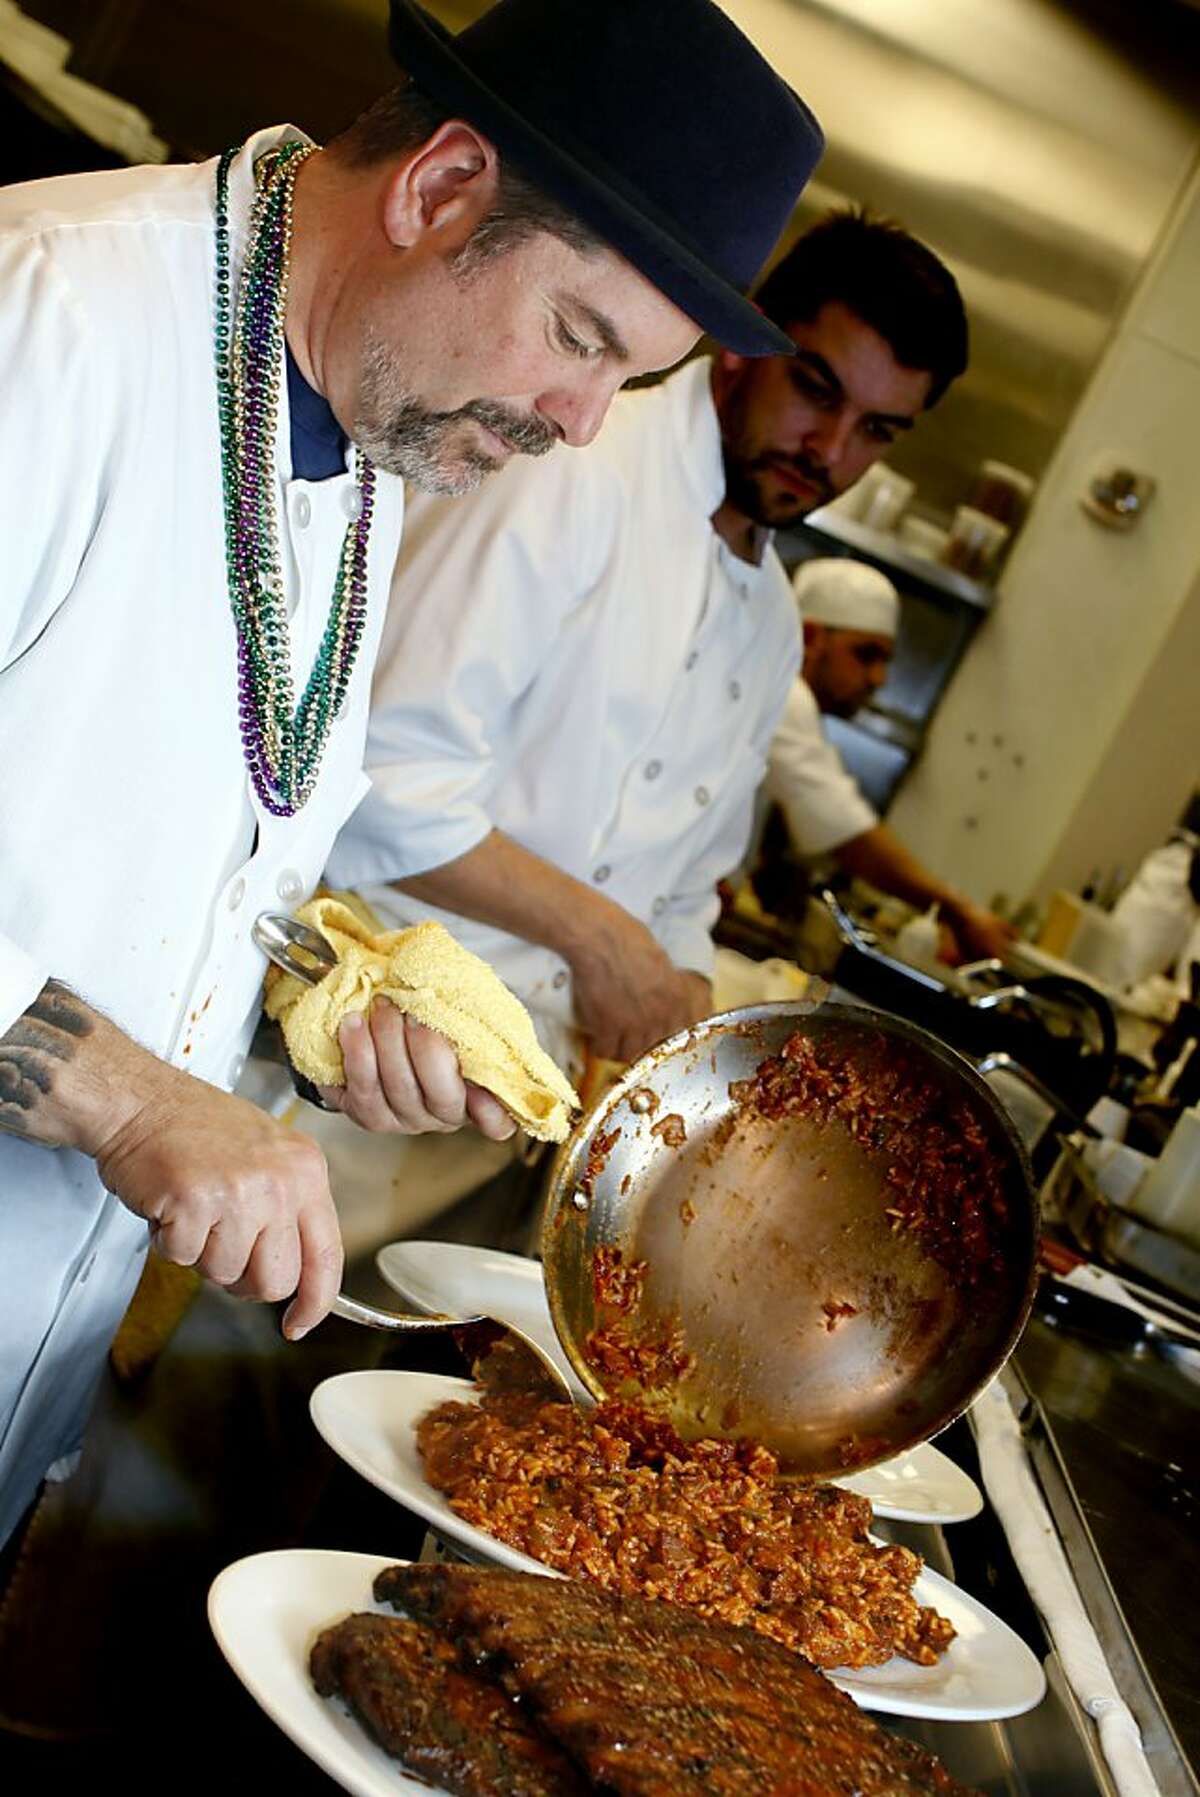 Mitch Rosenthal prepares Mardi Gras dishes on a busy Tuesday afternoon at Town Hall restaurant in San Francisco, where he is the executive chef. February 7, 2012